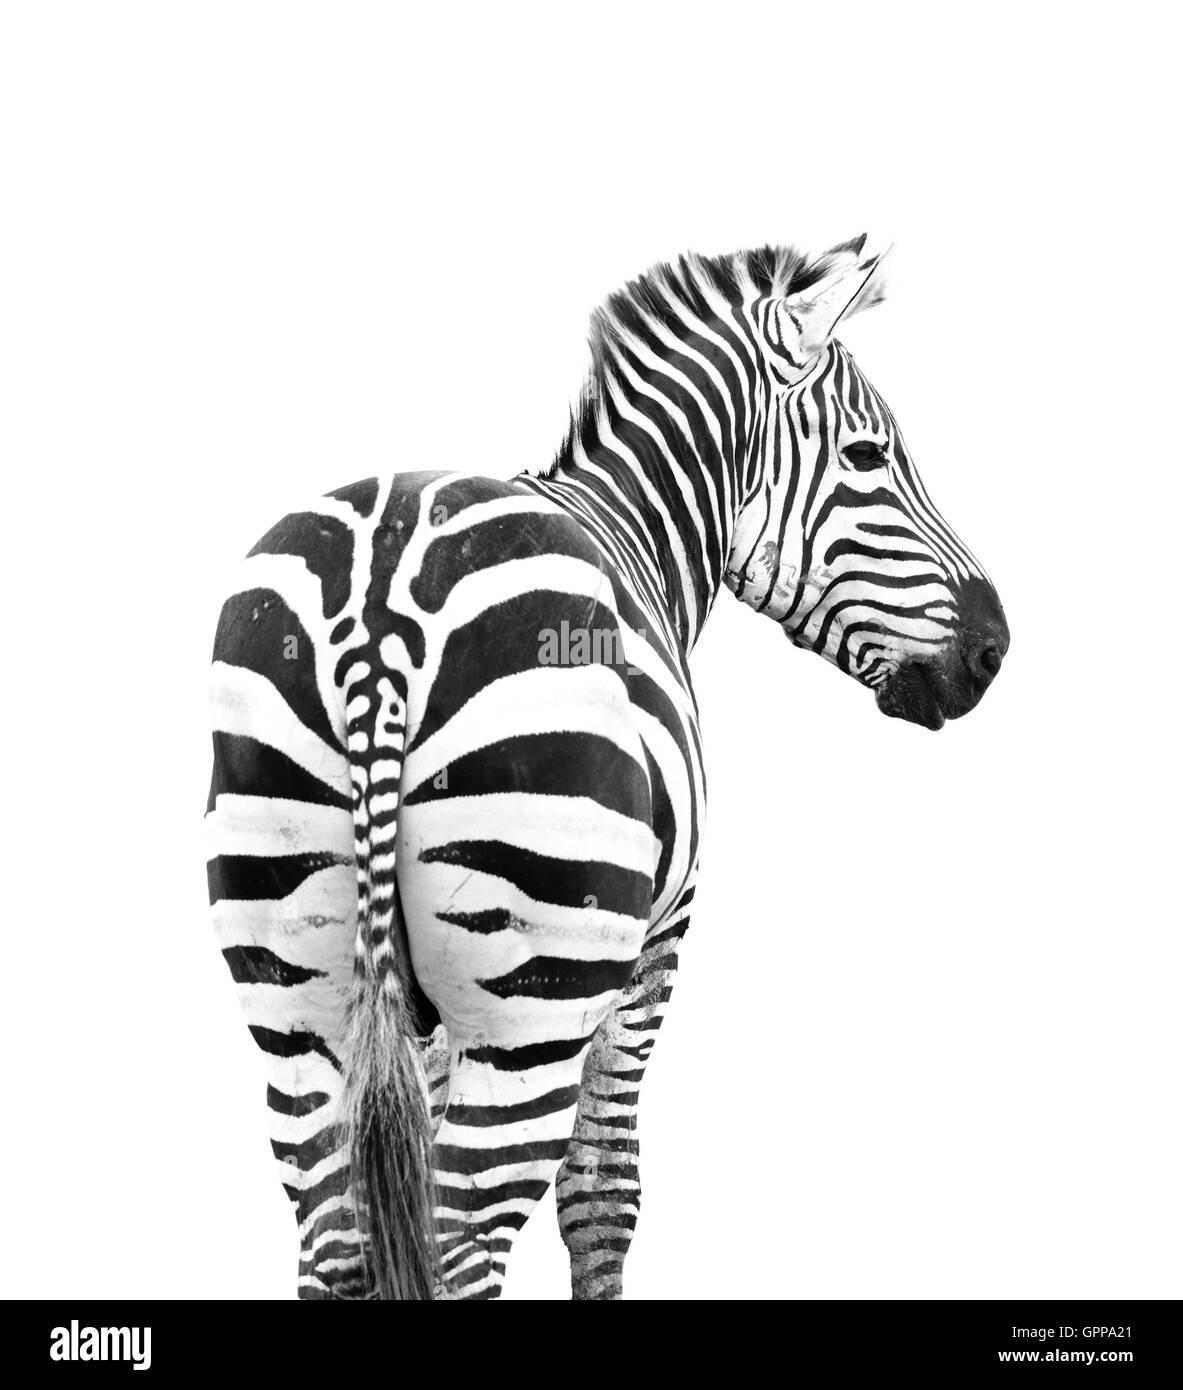 zebra looking back shoot from behind its butt isolated on white background Stock Photo